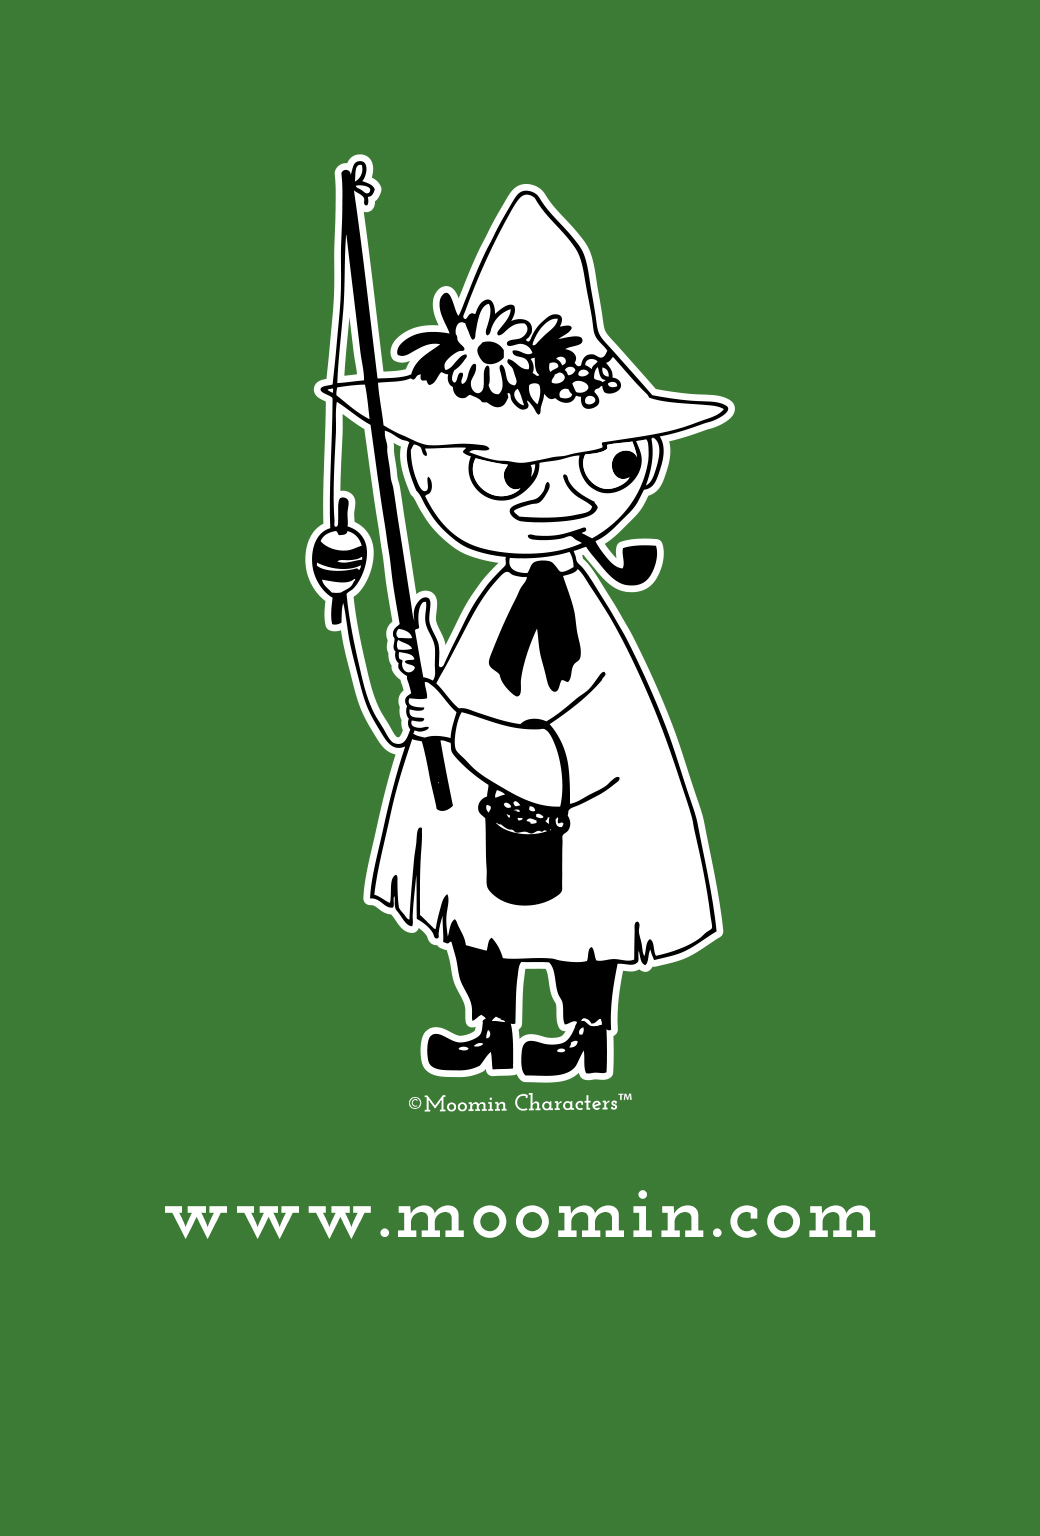 Our Moomin Wallpaper In June Features Snufkin Moomin